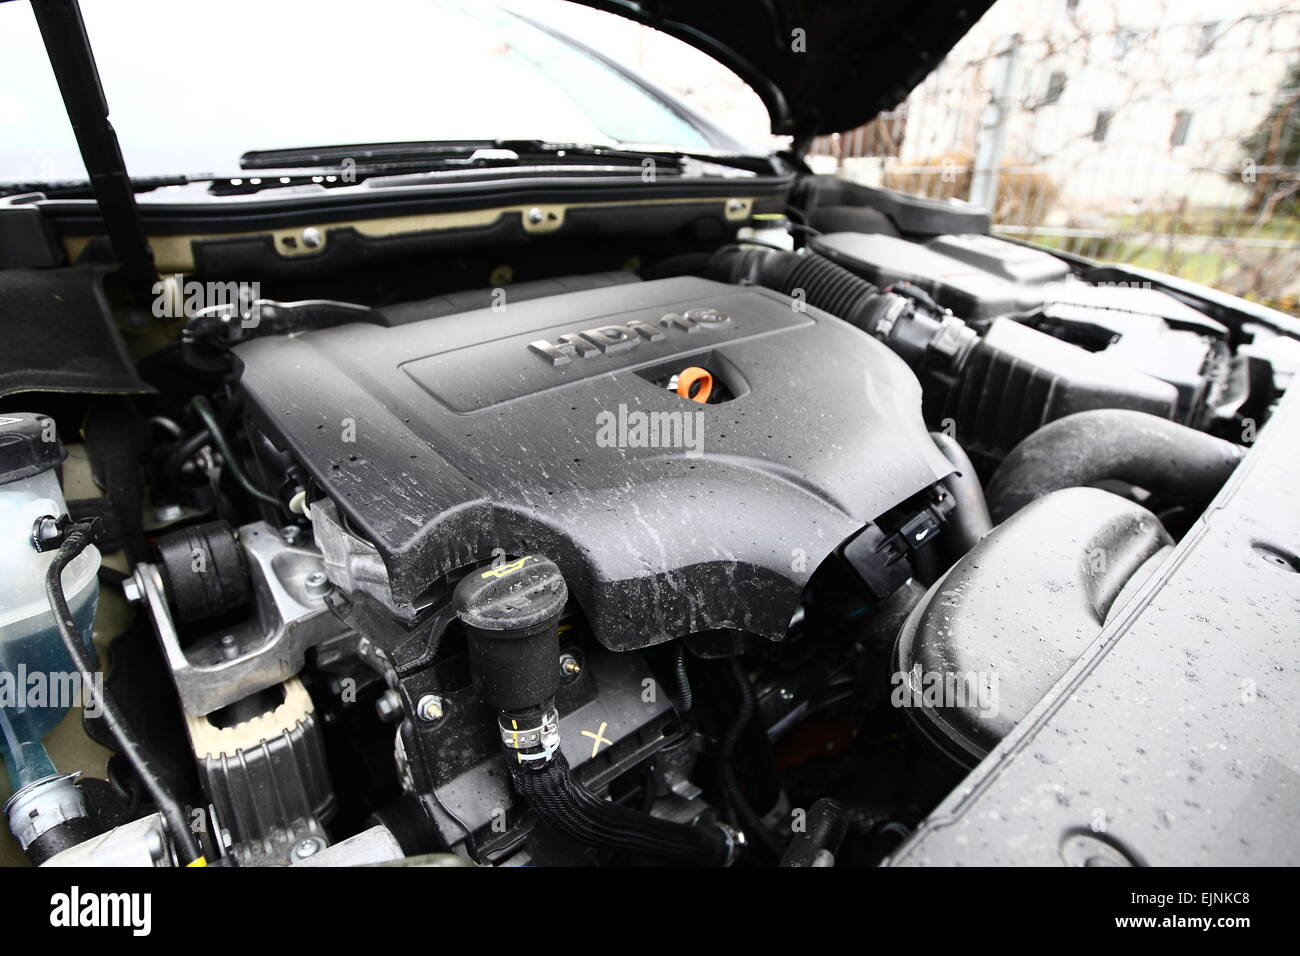 Gdynia, Poland. 30th March, 2015. Acc. recent studies exhaust from diesel engines contribute to an increase of 20 to 50% of lung cancer. Pictured: HDI type diesel engine mounted in Peugeot 508 car Credit:  Michal Fludra/Alamy Live News Stock Photo